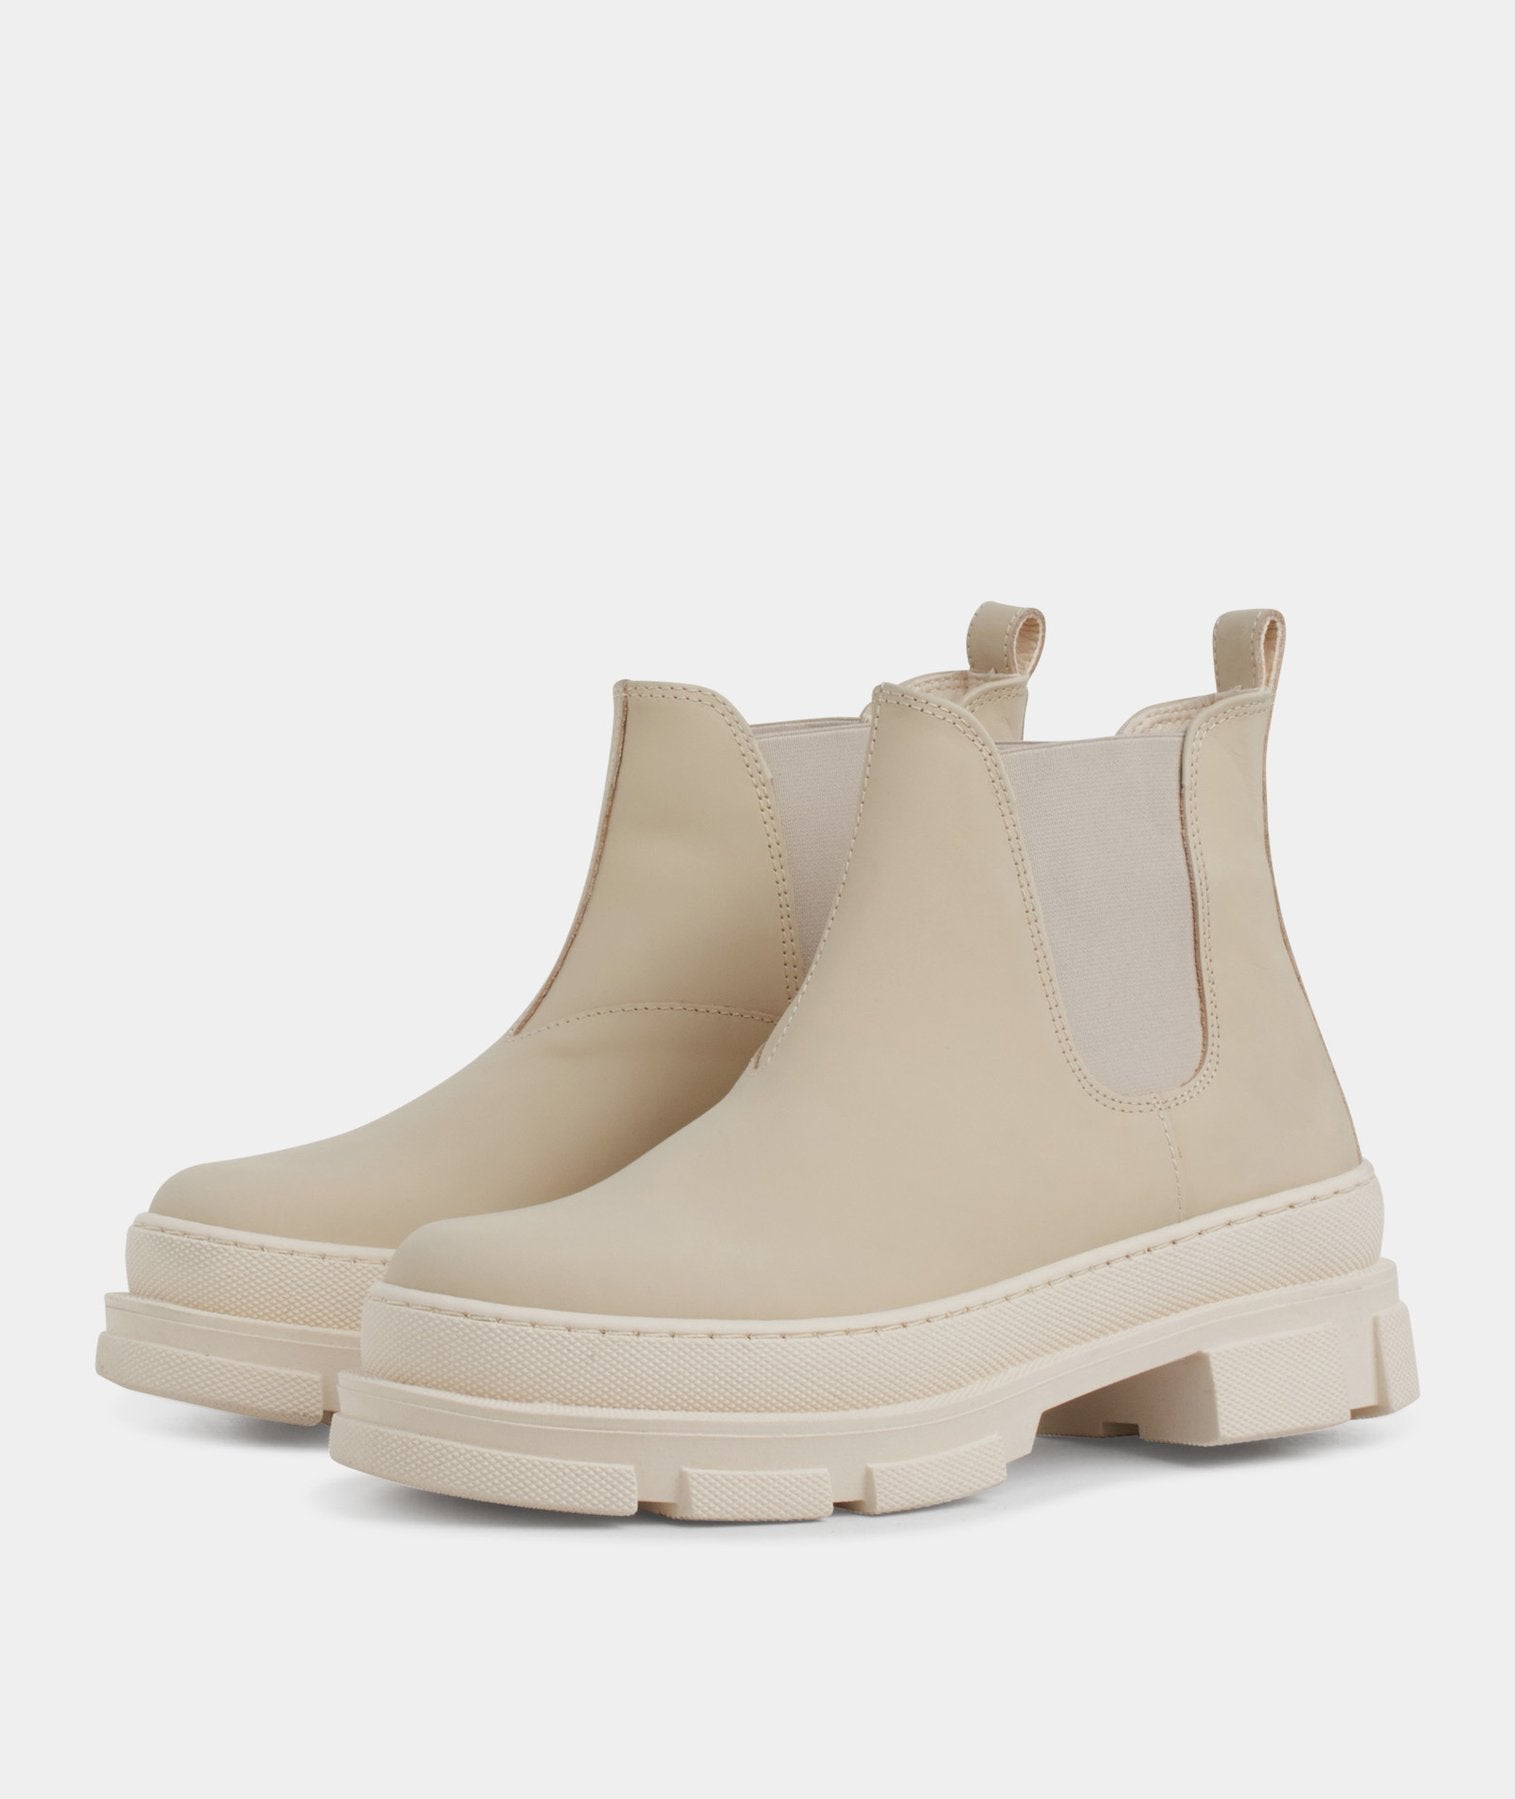 Irean Chelsea ,Off White rubberrised leather